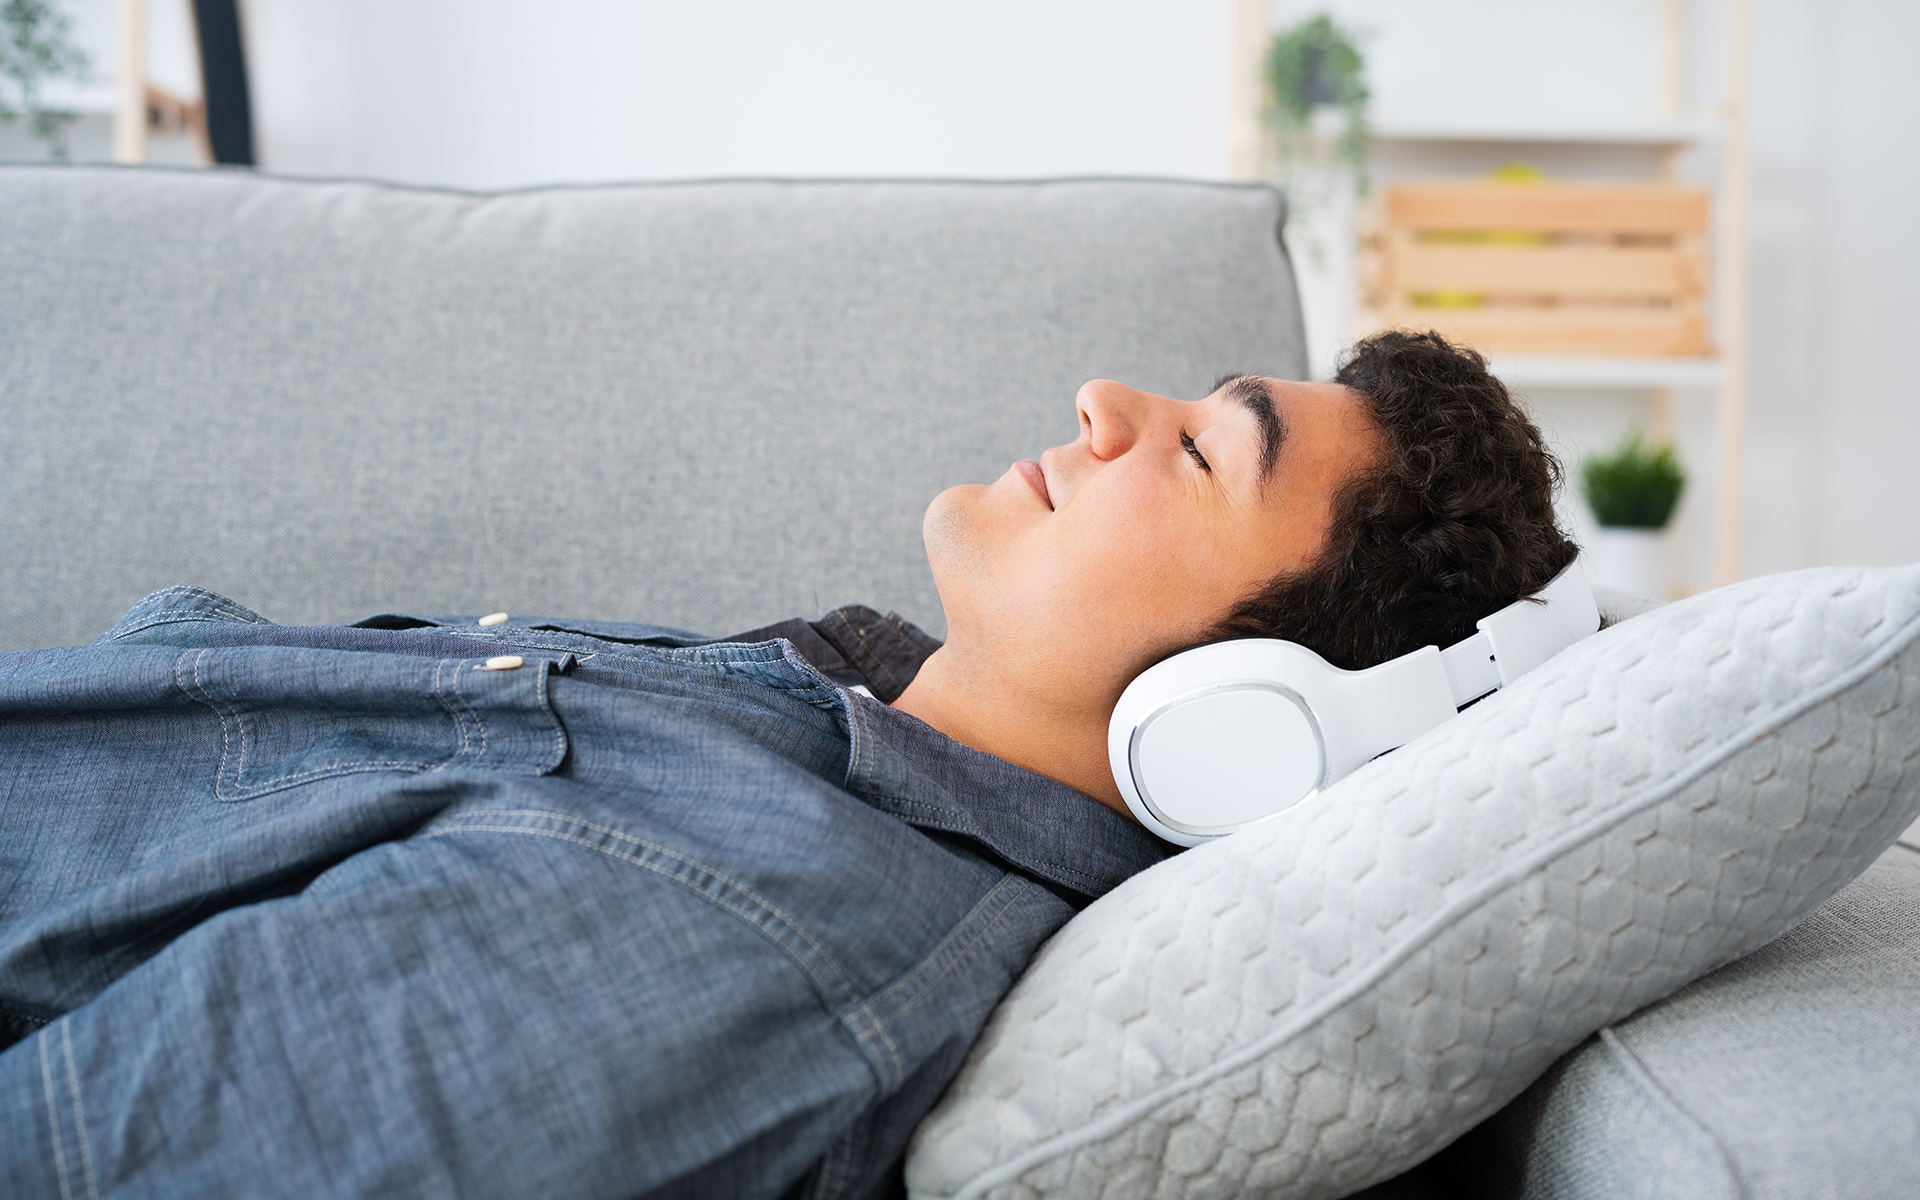 12 Minute Meditation: A Guided Visualization Meditation to Fill Your Cup12 Minute Meditation - teen boy lays on the couch with white headphones on.